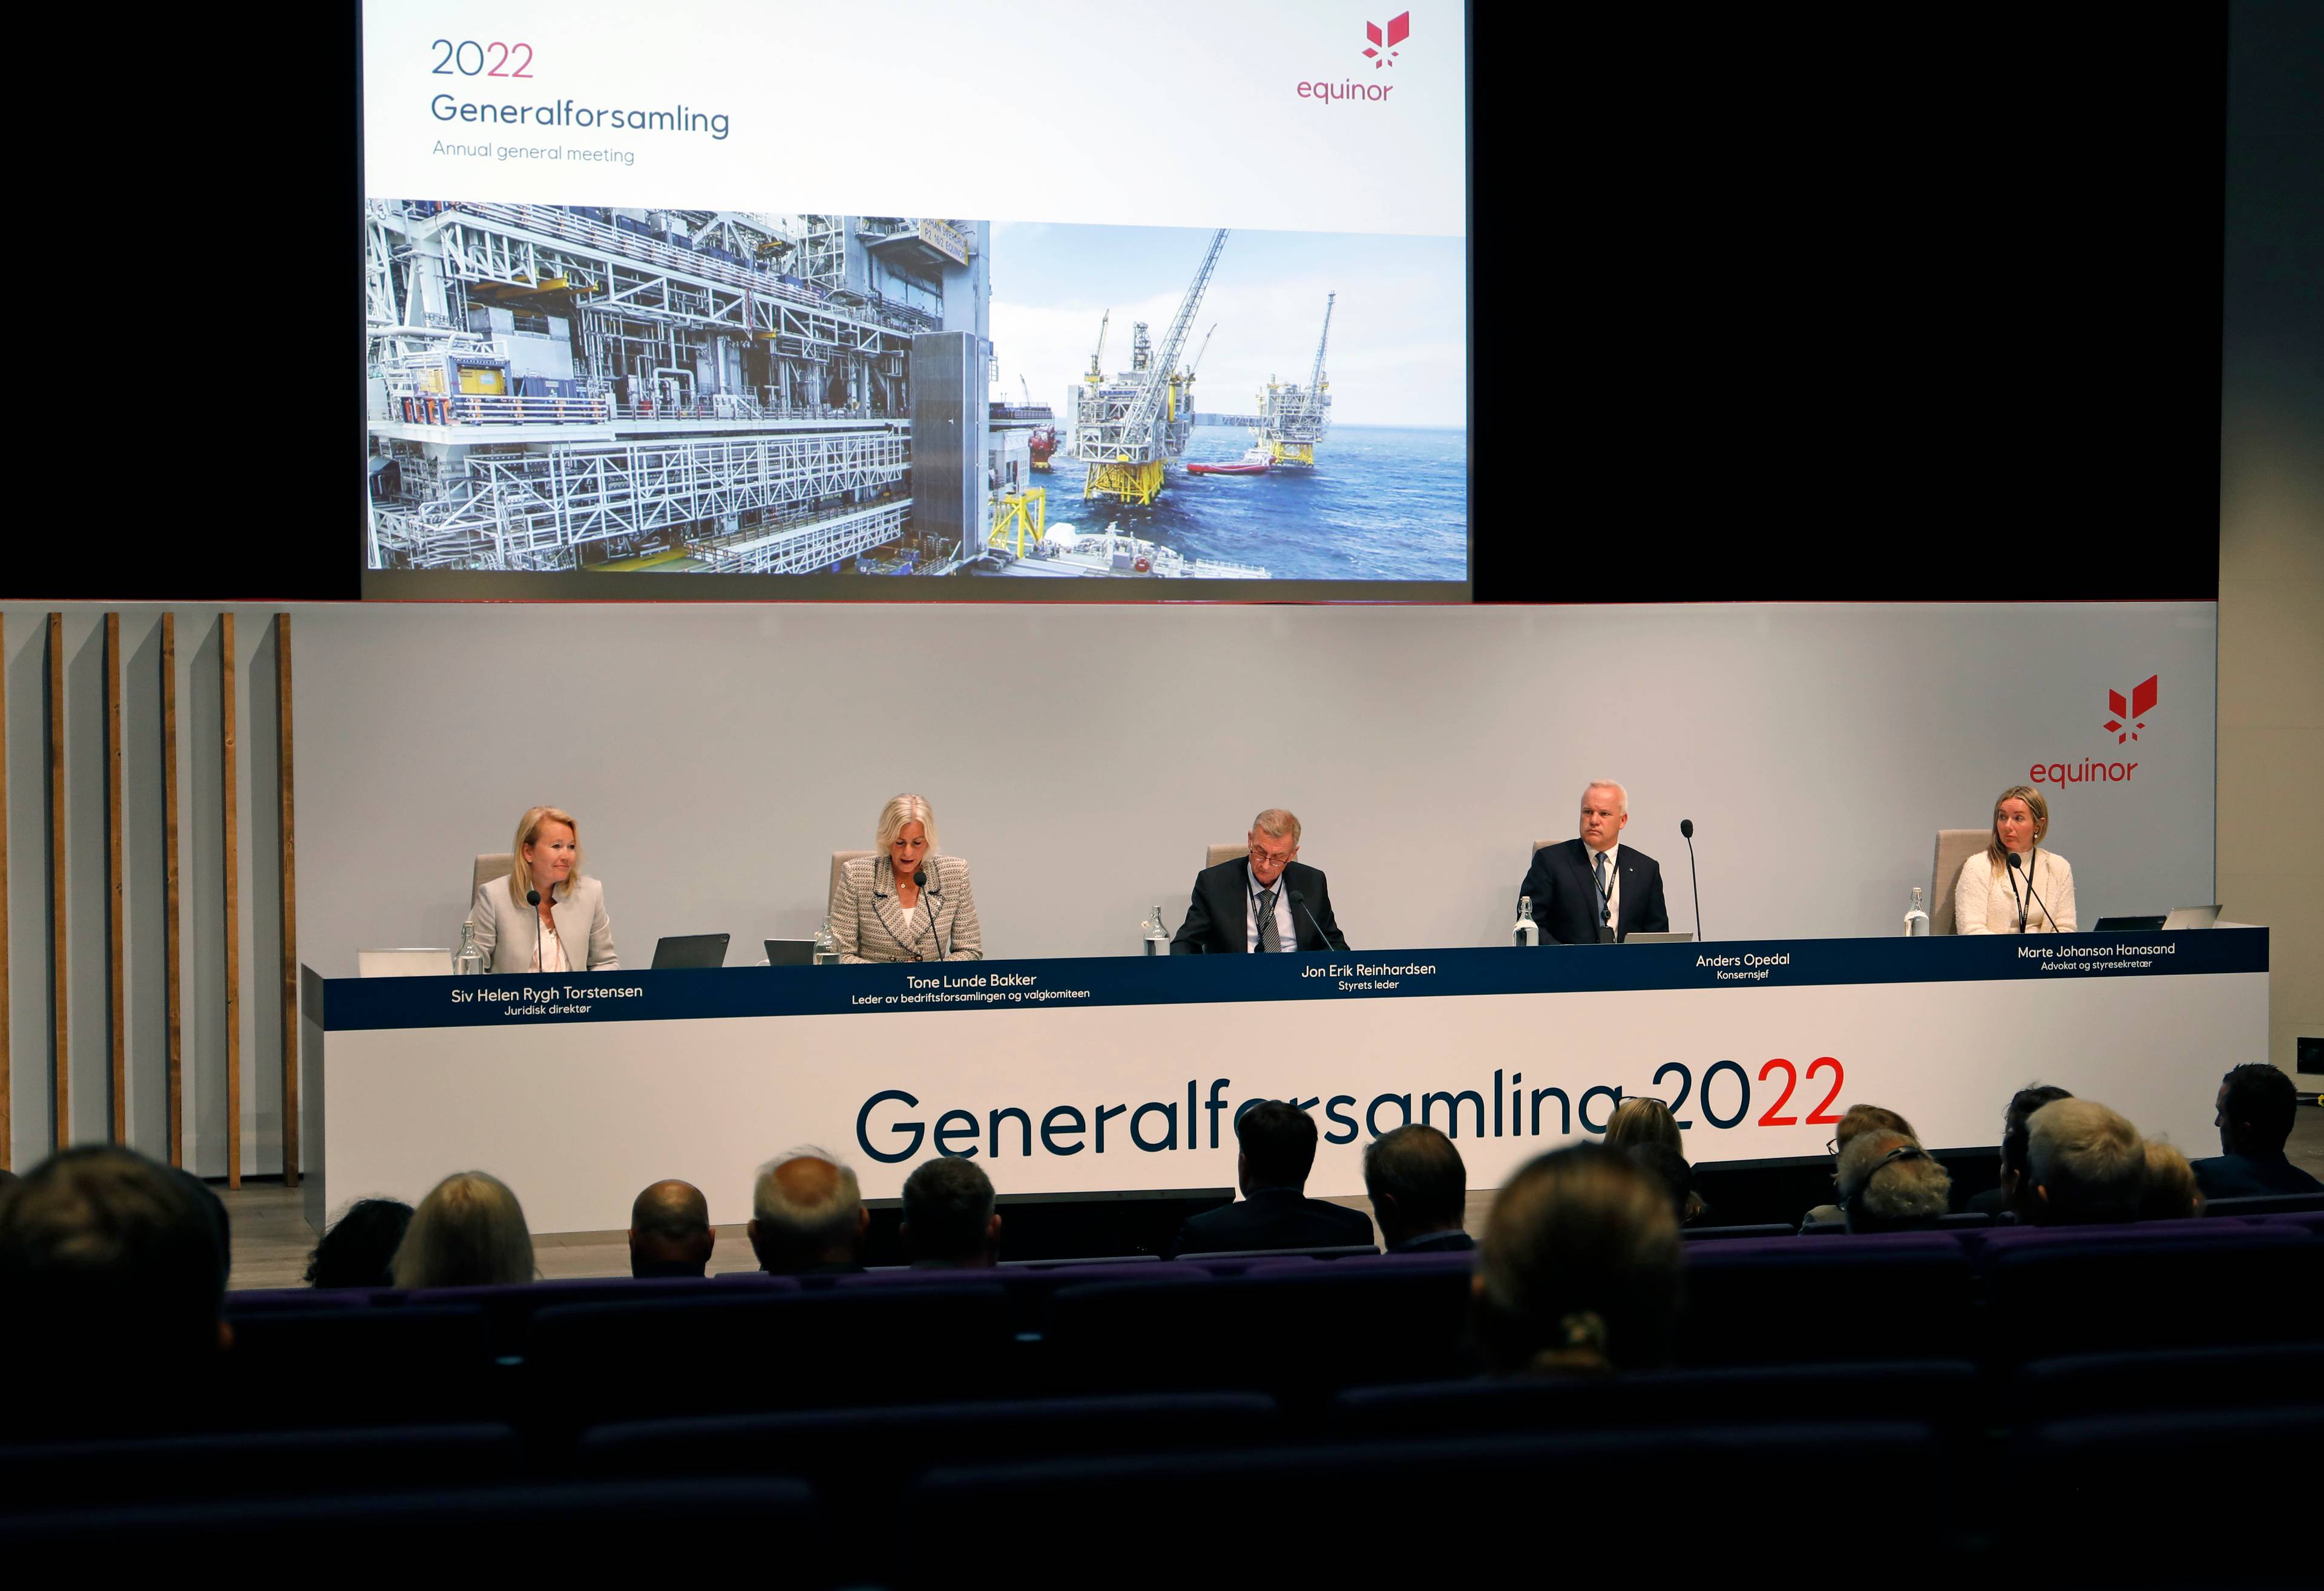 Equinor's Annual General Meeting 2022